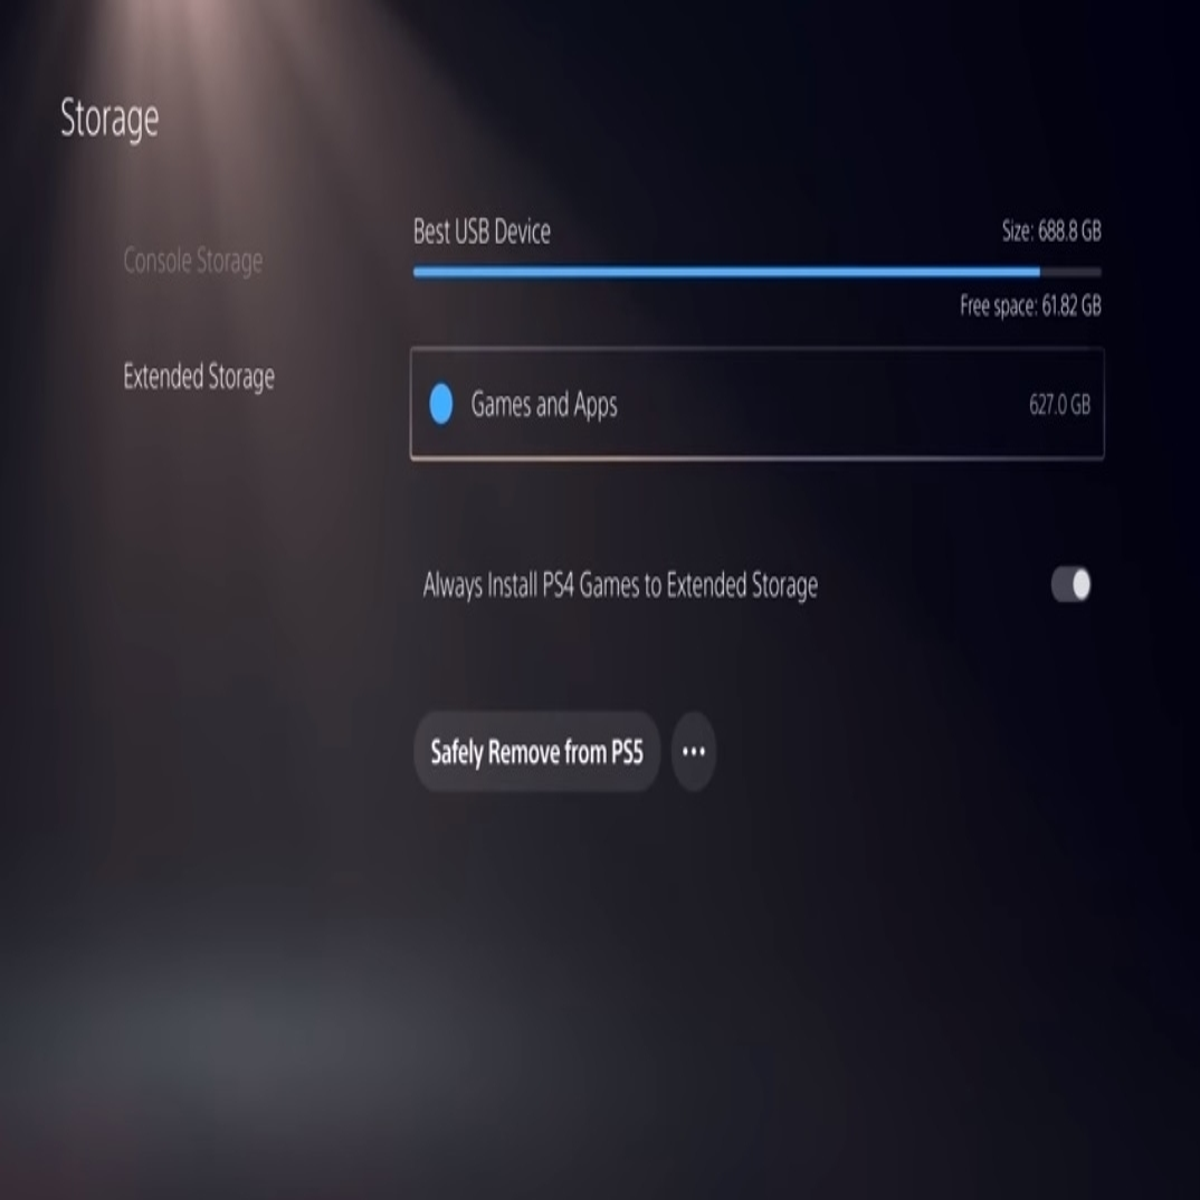 exploring ways to let PS5 users PS5 games on a USB drive a future update |